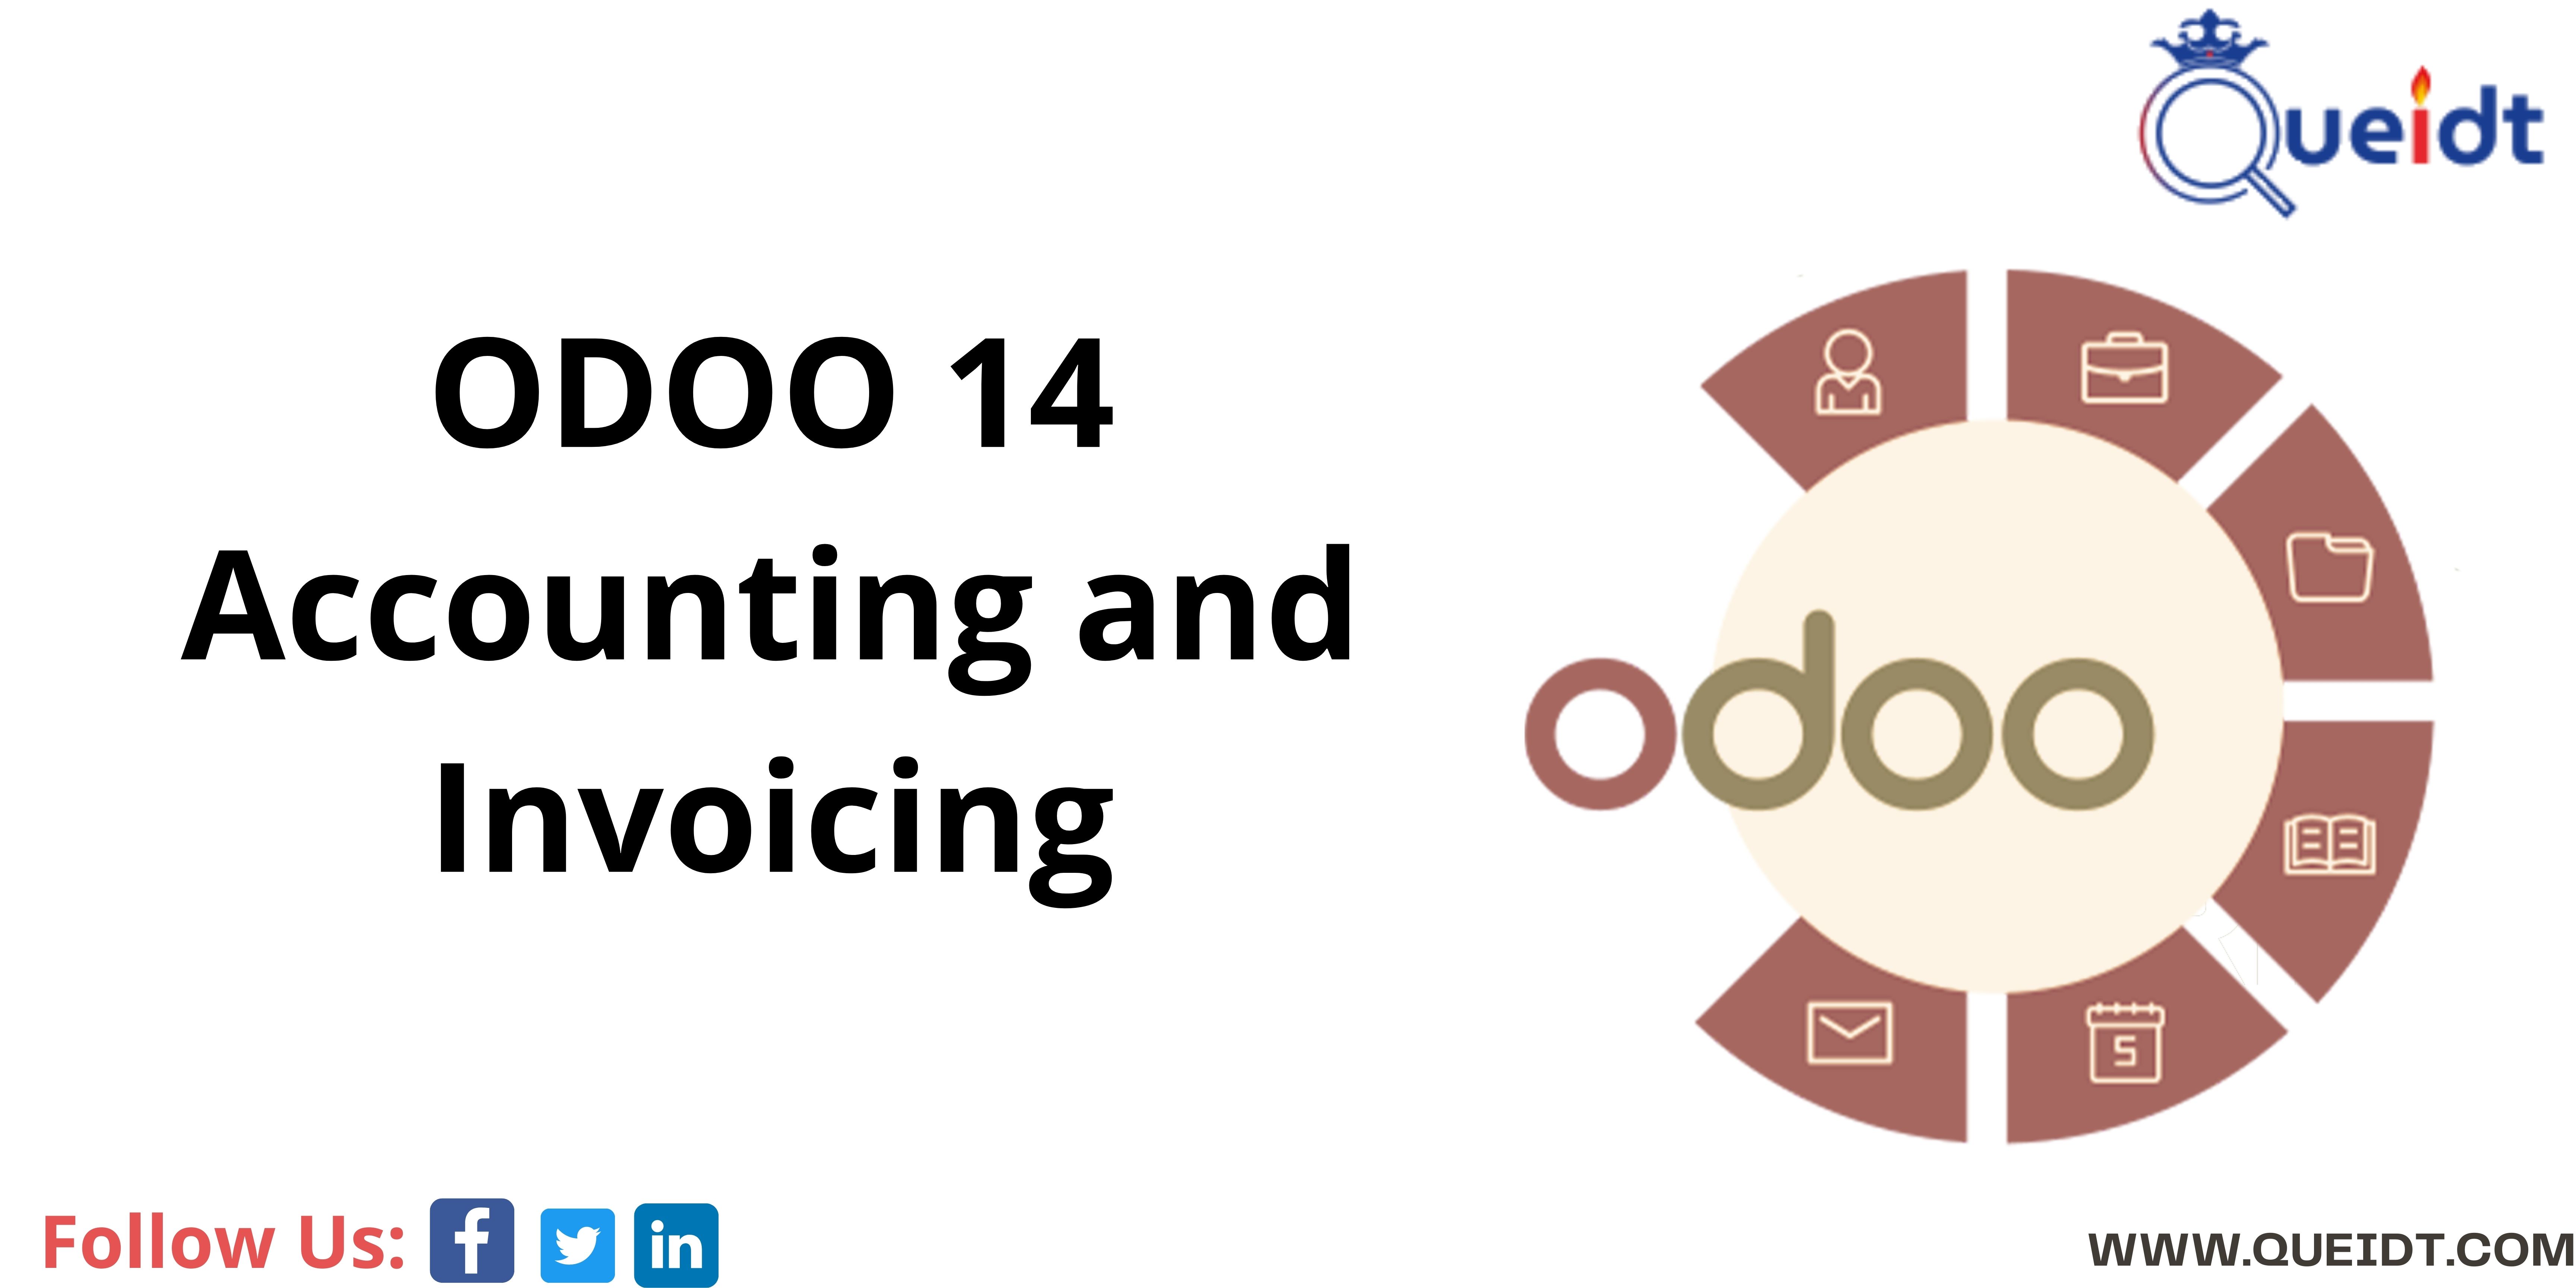 ODOO 14 Accounting and Invoicing